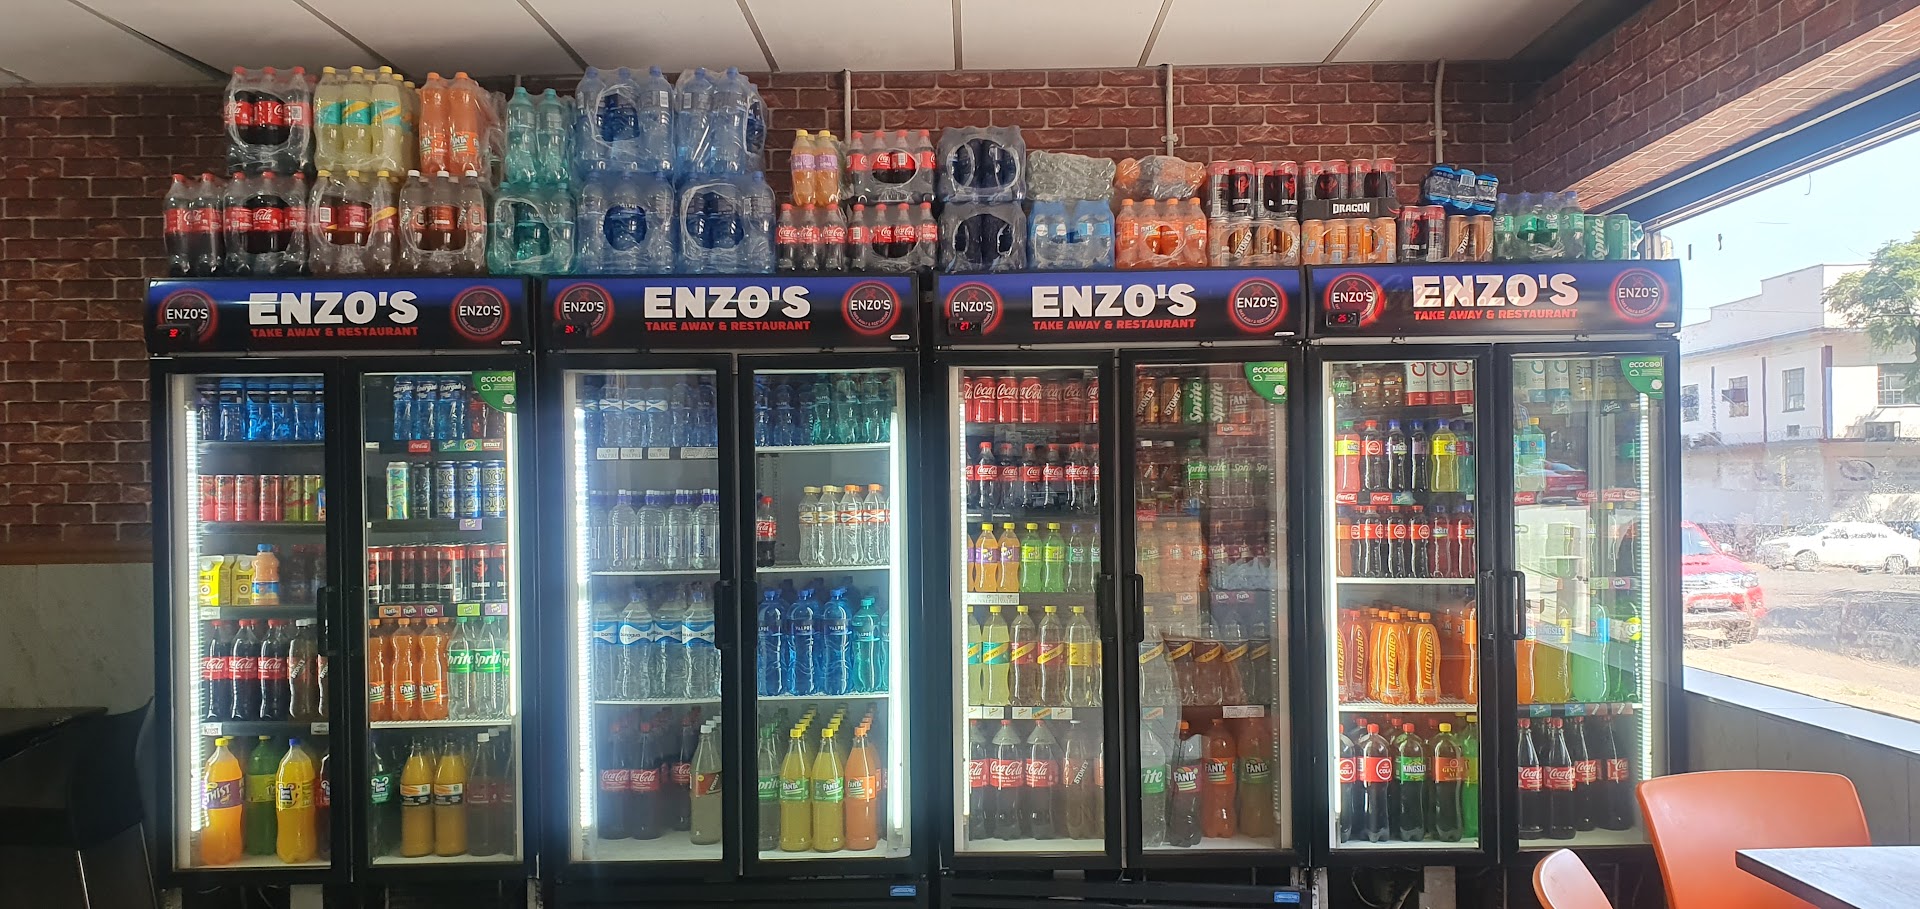 ENZO’S TAKE-AWAY AND RESTAURANT